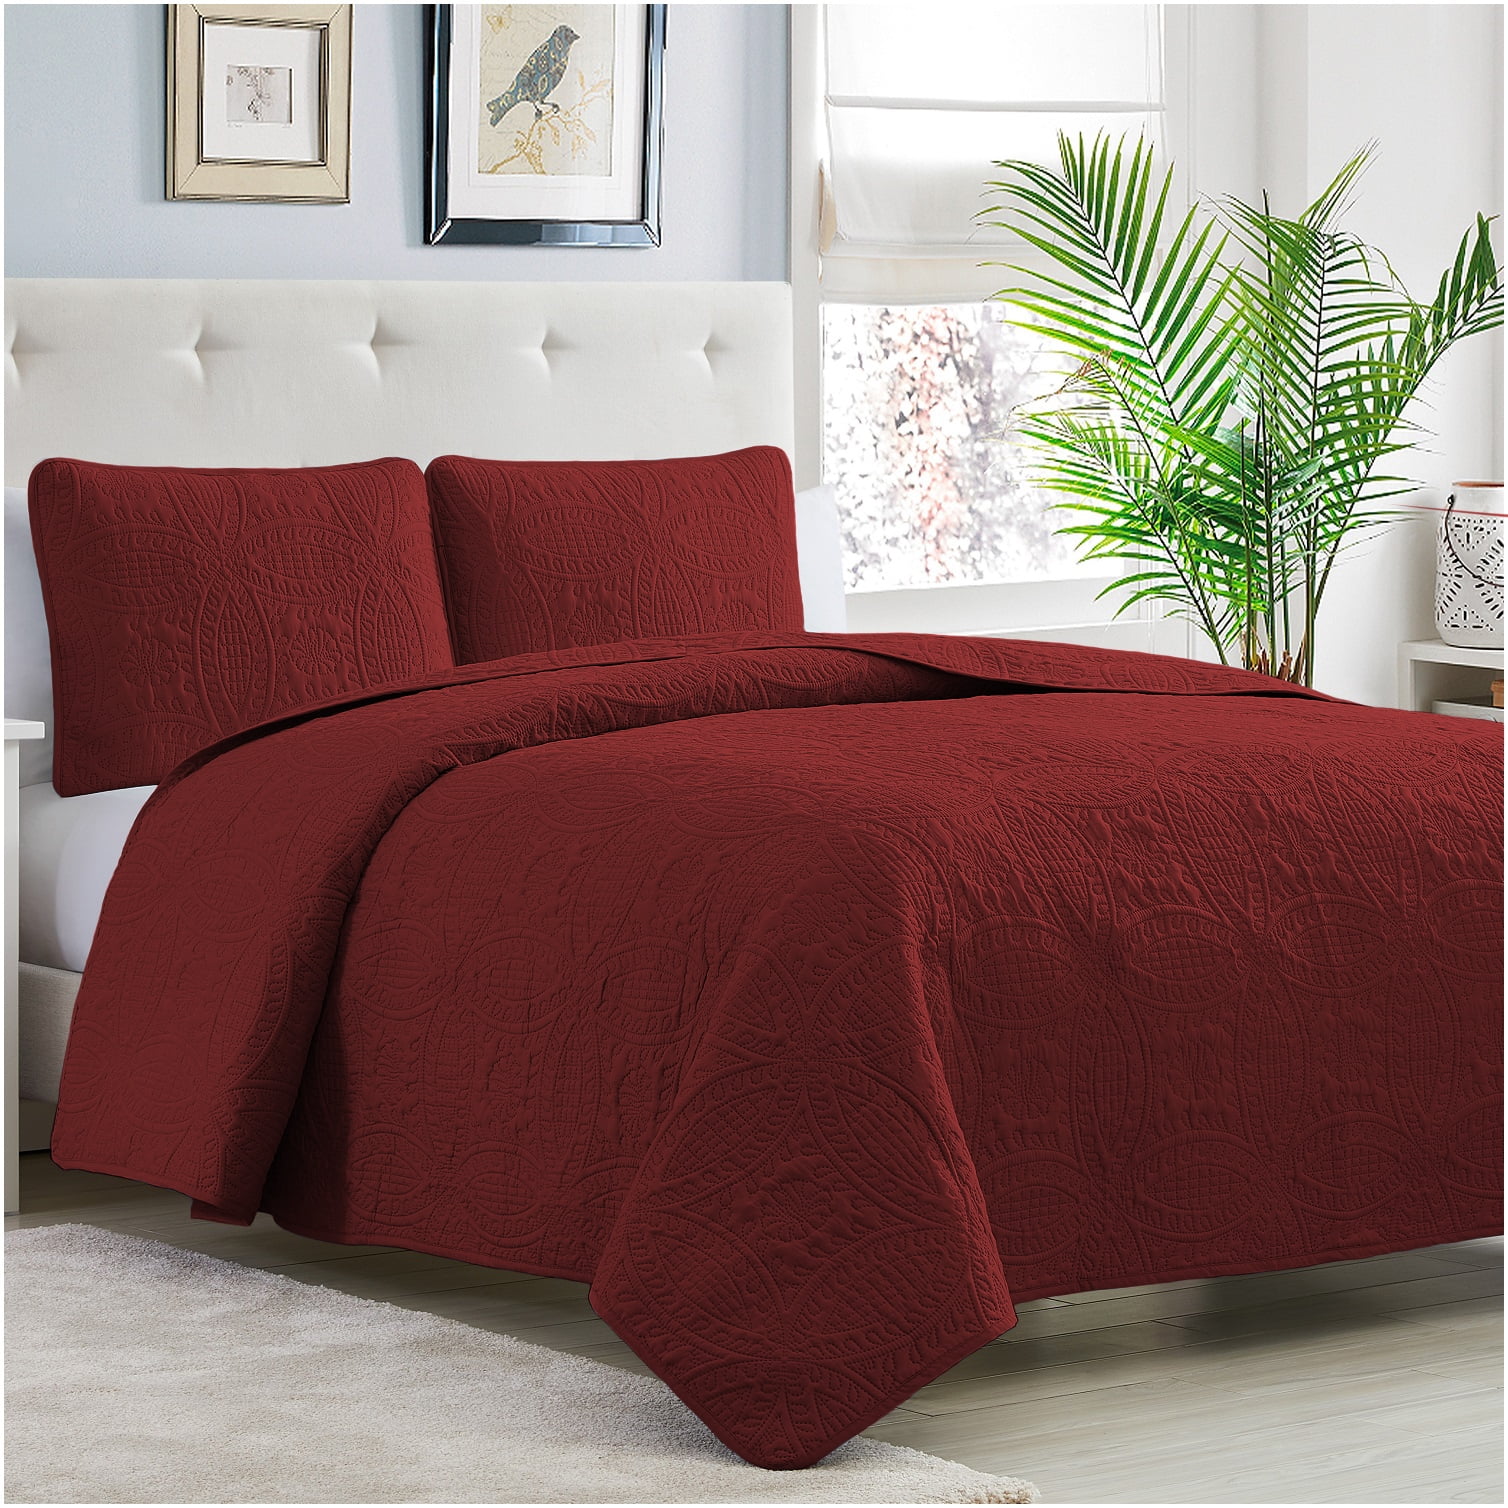 All Sizes Details about   SIENNA LIVING Luxury Bamboo Cotton Sheet Set Blush NEW 2021 Colour 